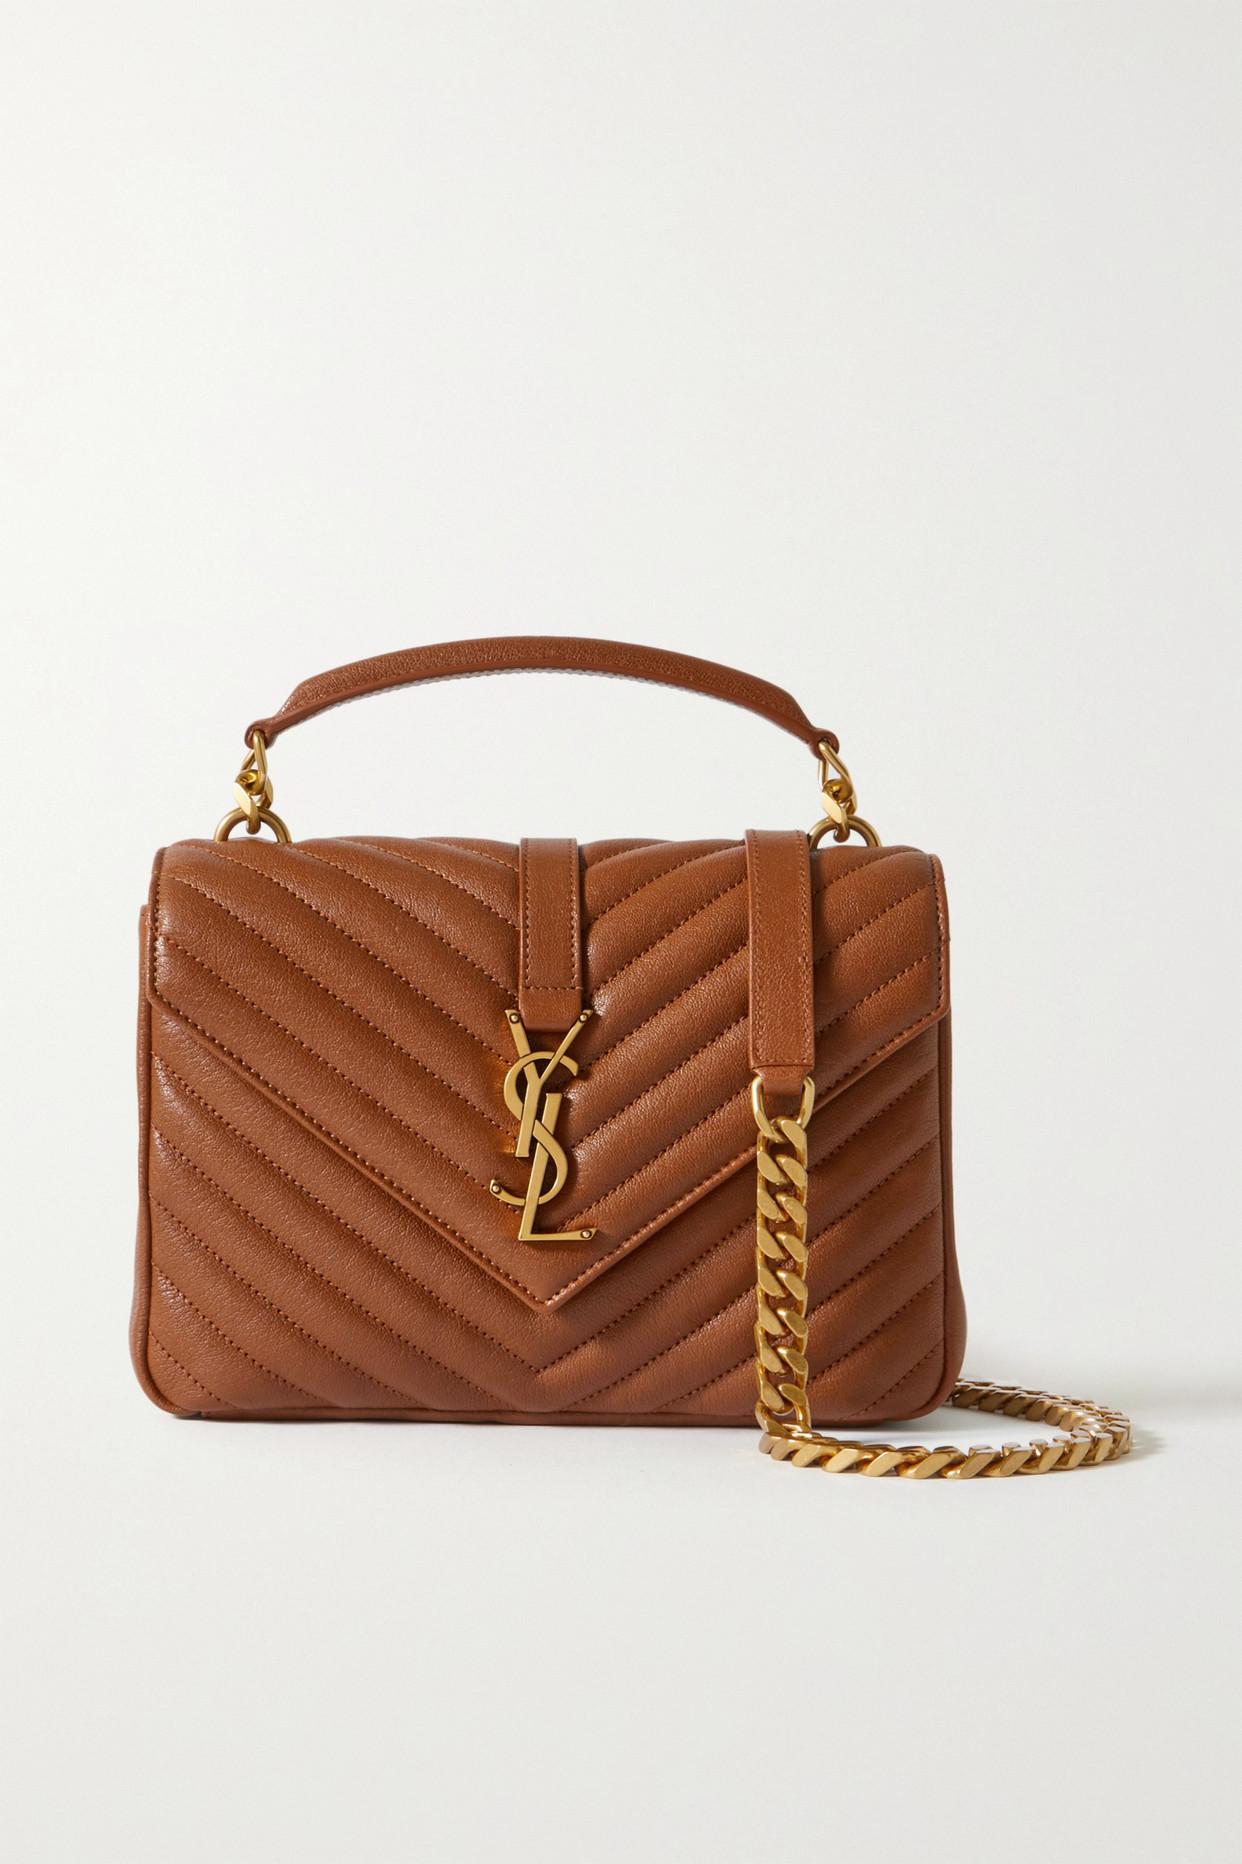 Saint Laurent College Medium Quilted Leather Tote in Brown - Lyst